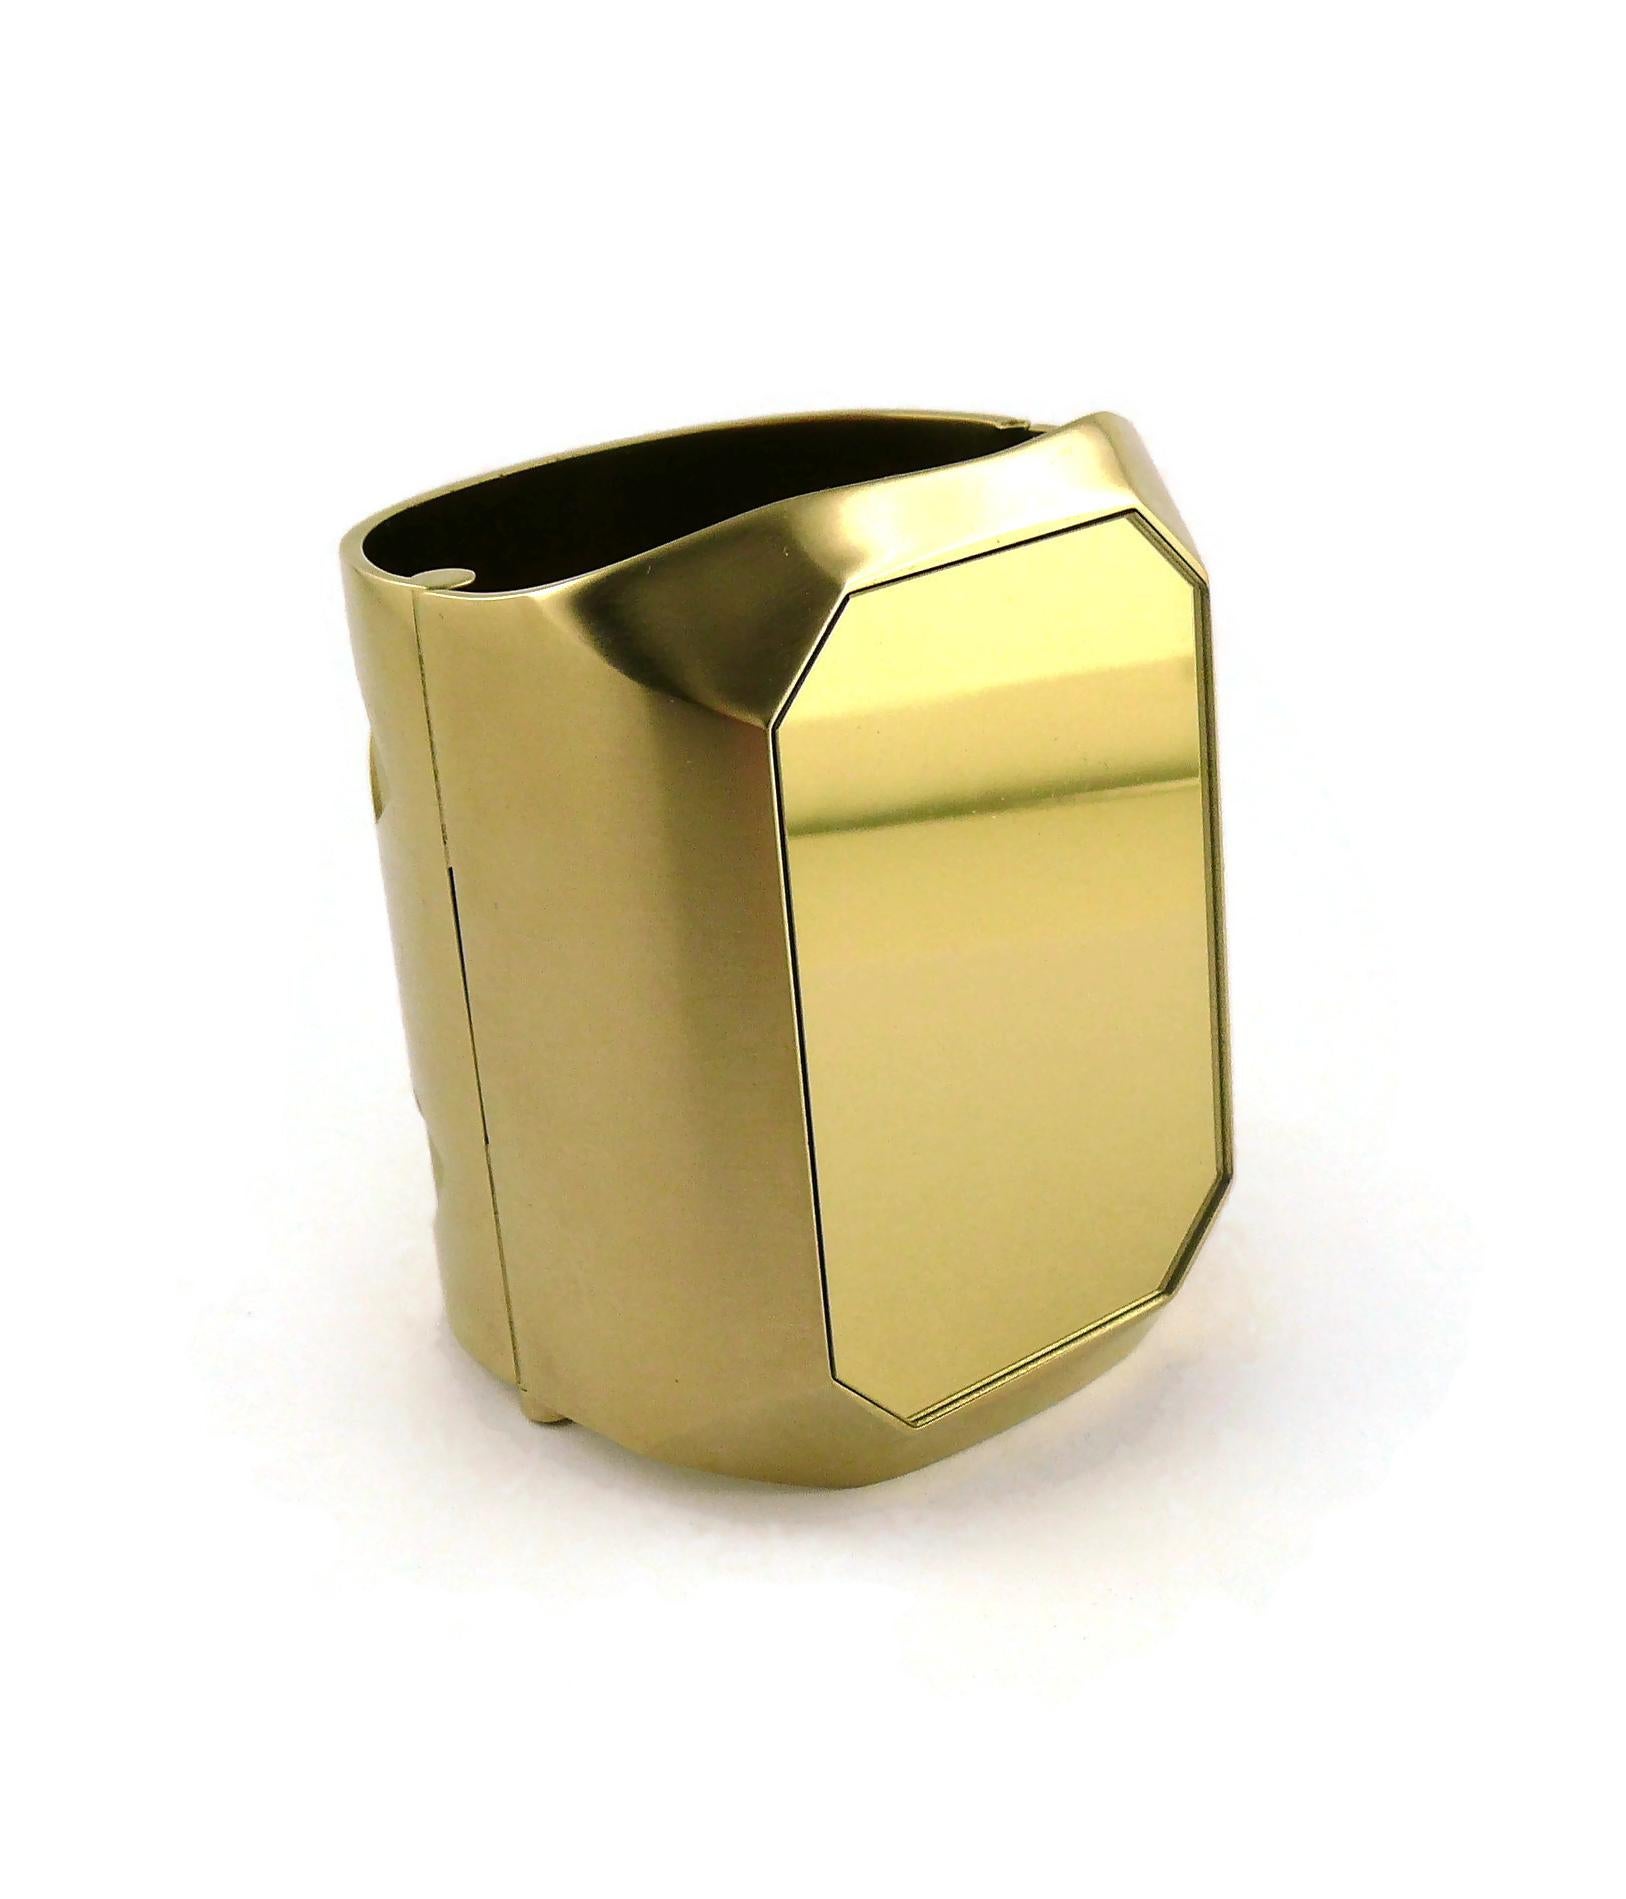 Chanel Massive Gold Toned Mirrored CC Wide Cuff Bracelet at 